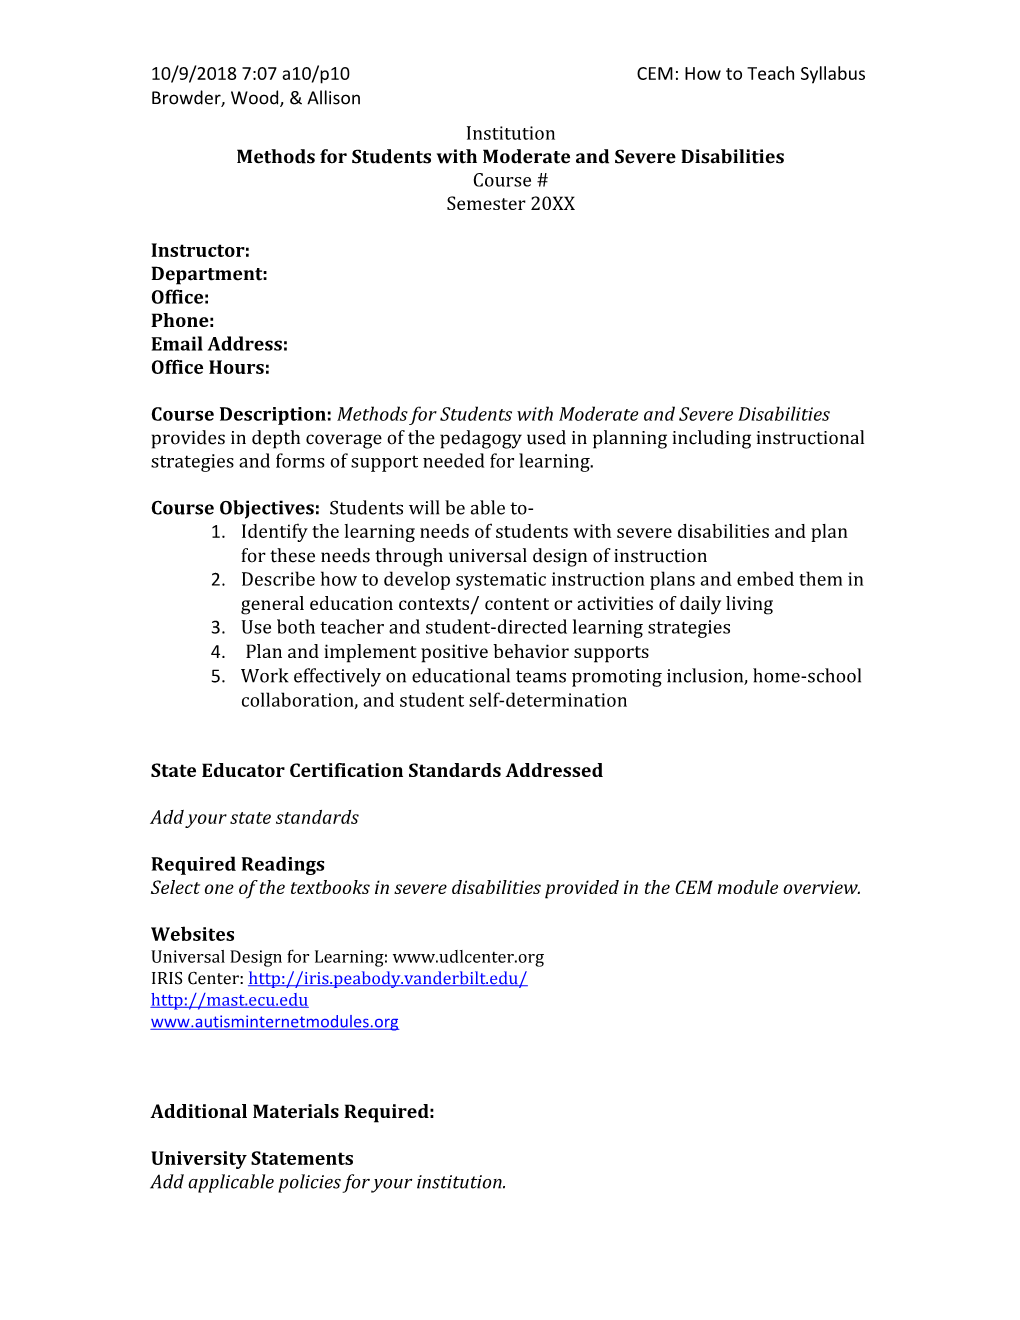 Methods for Students with Moderate and Severe Disabilities